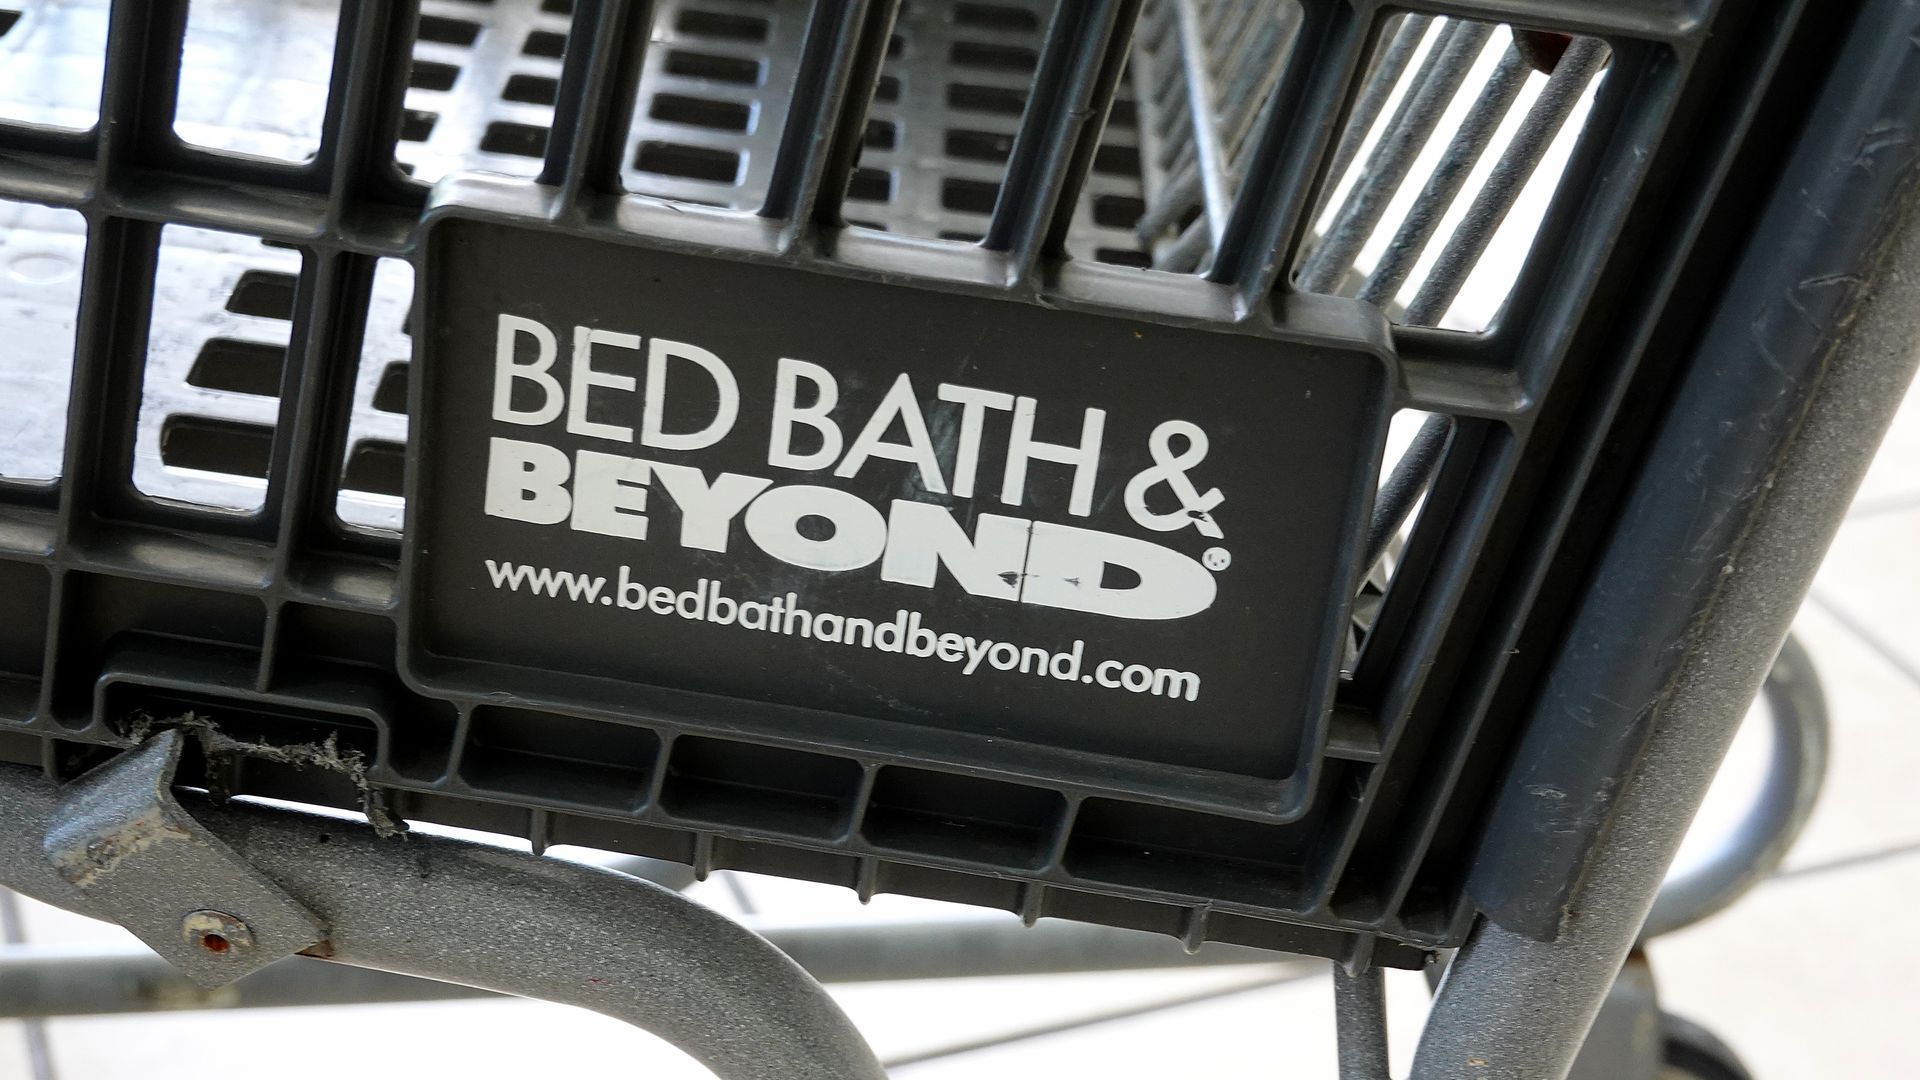 Retailer Bed Bath & Beyond's logo appears on the bottom of a metal shopping cart.